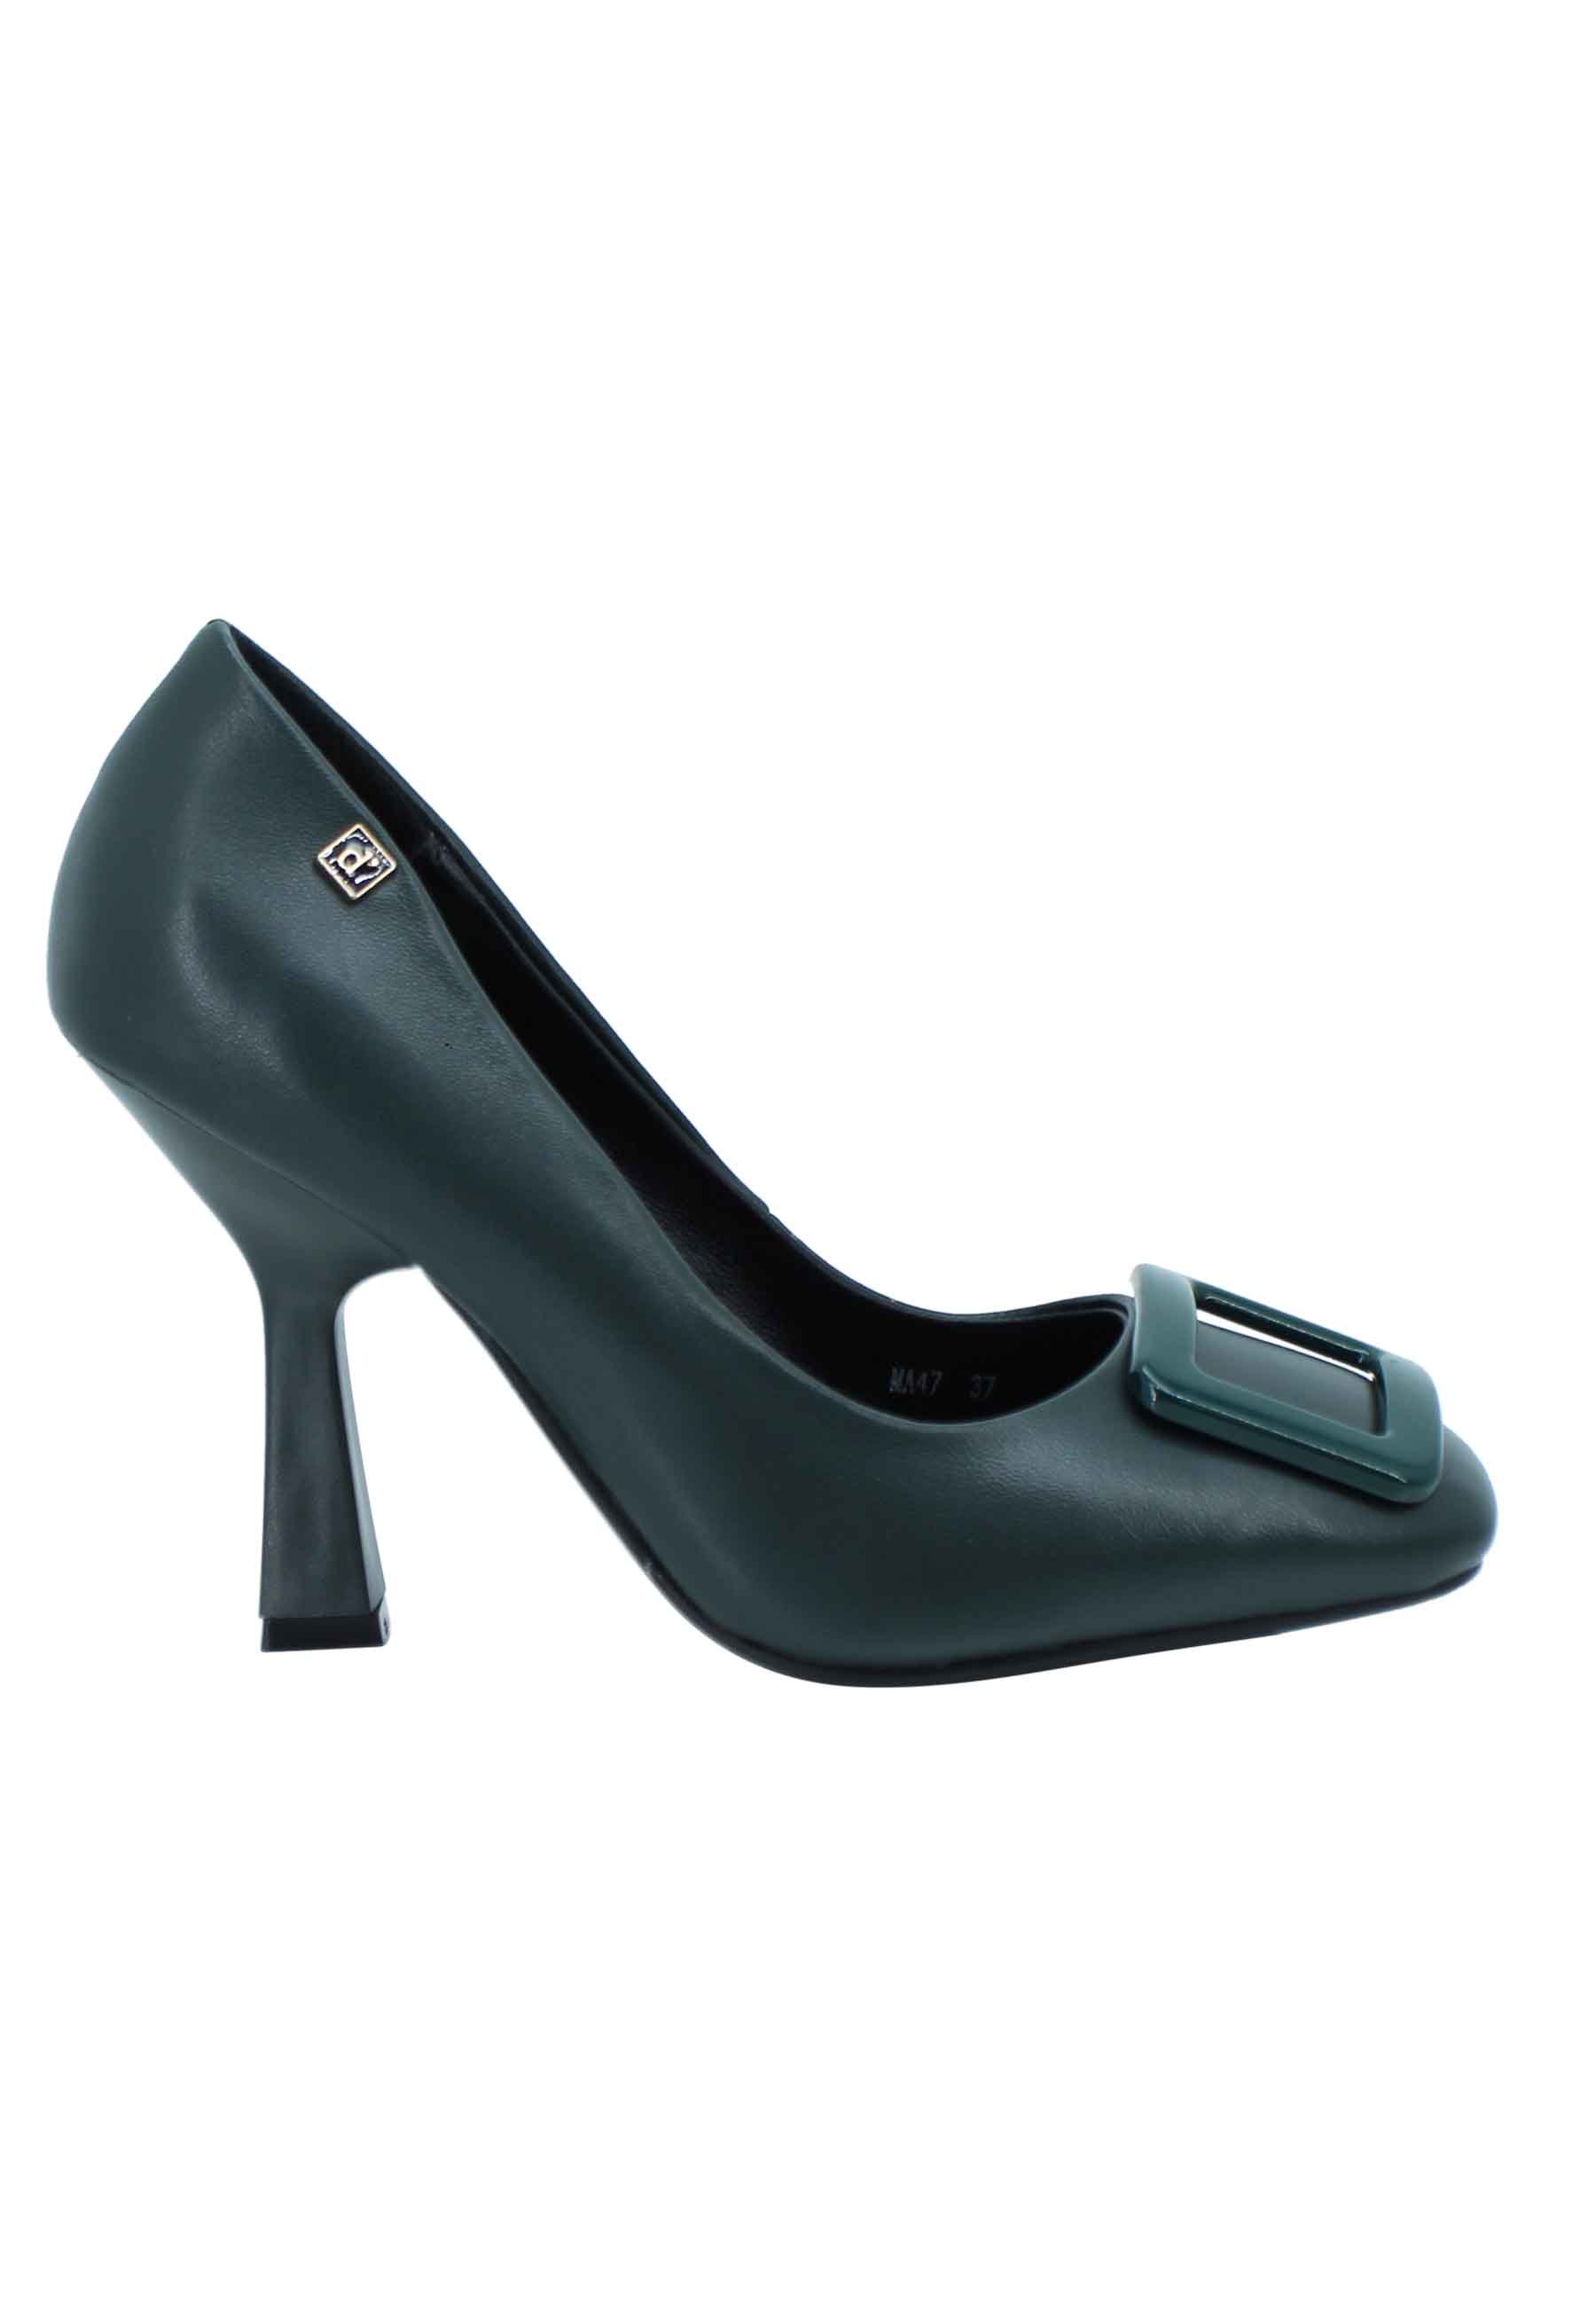 Women's green leather square toe pumps and matching accessory